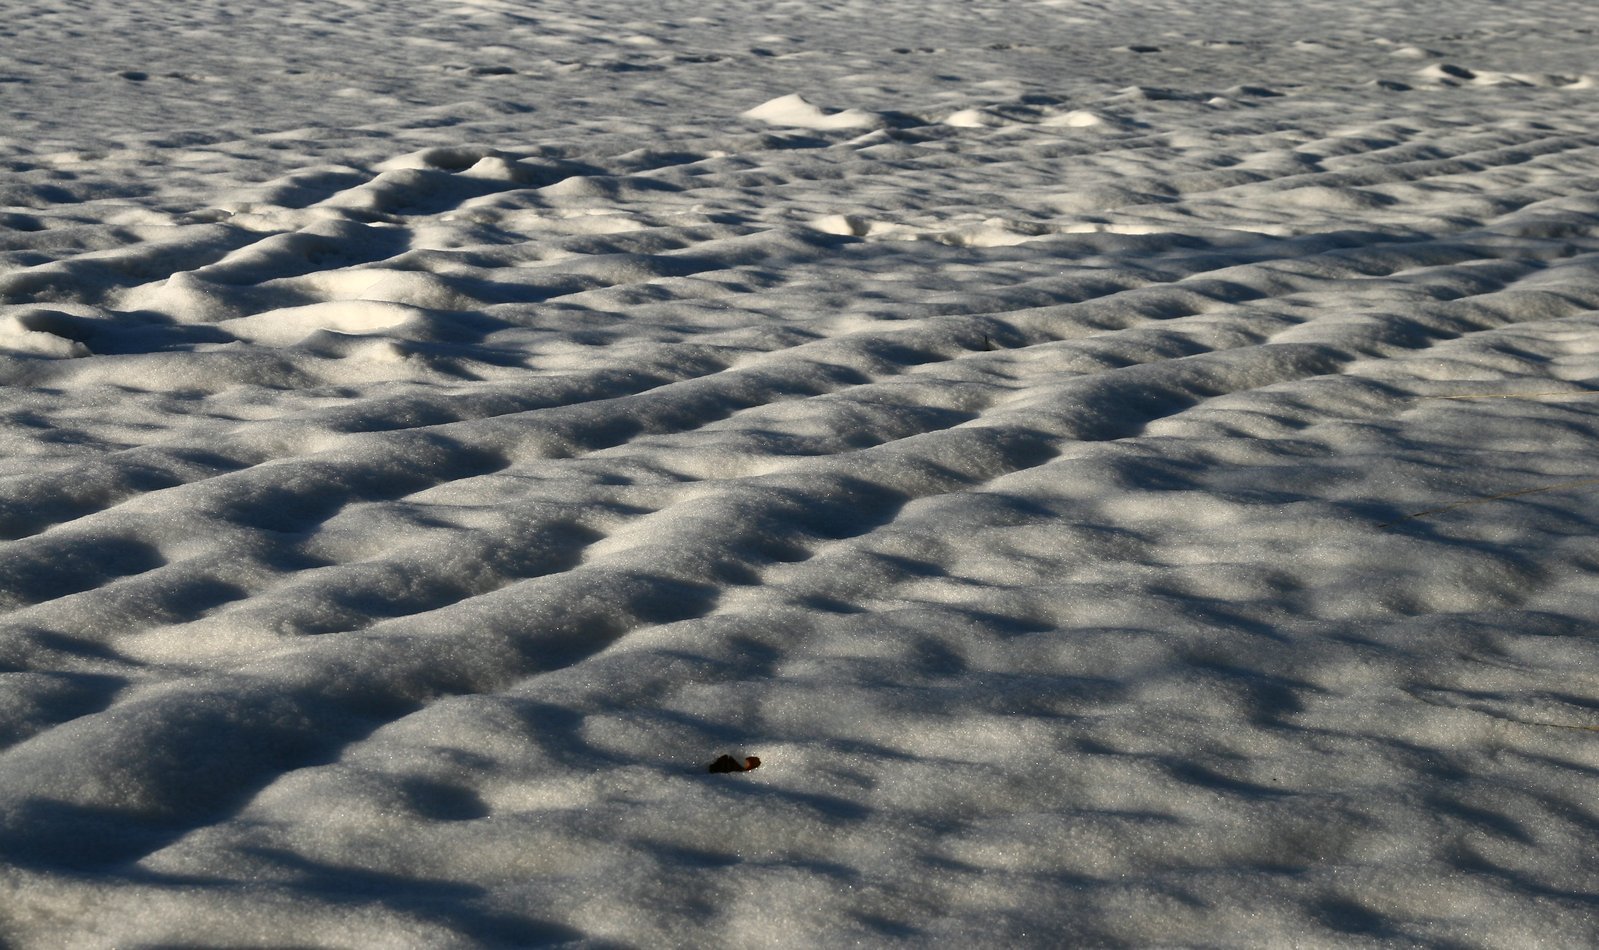 footprints in the snow as they travel along a trail